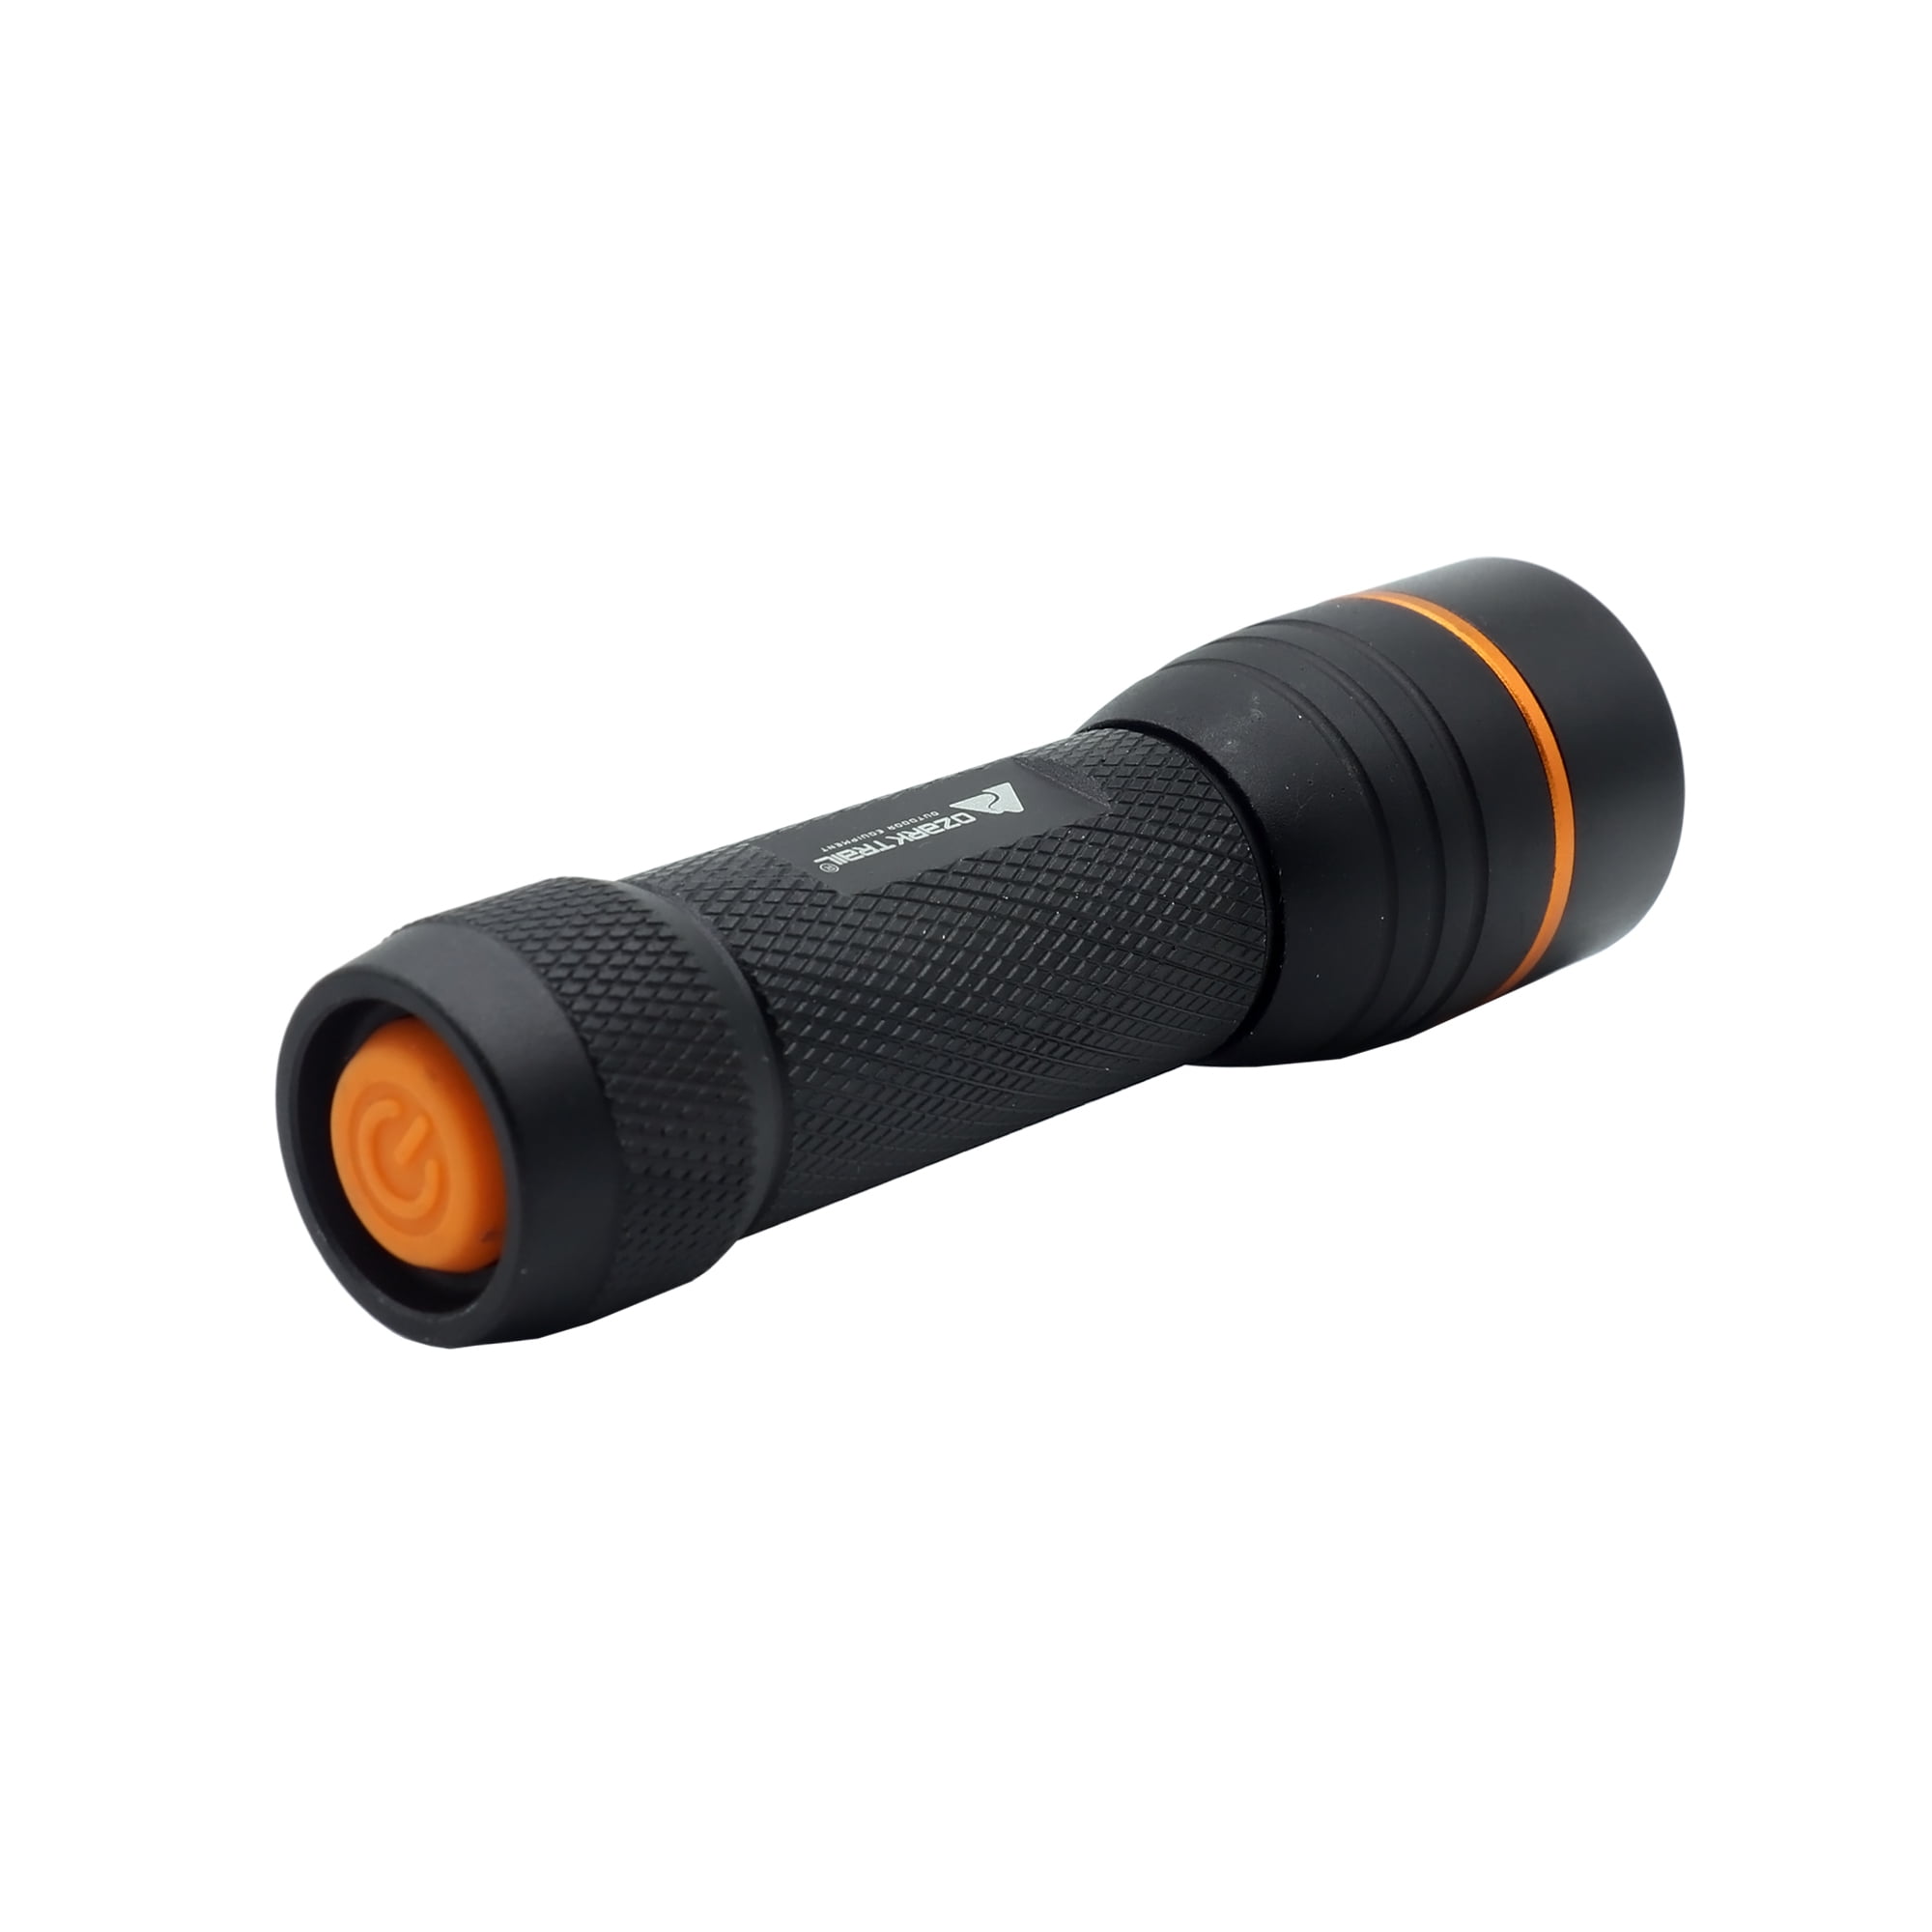 Ozark Trail 2600 Lumen LED Hybrid Power Flashlight with Alkaline Batteries and Rechargeable Battery